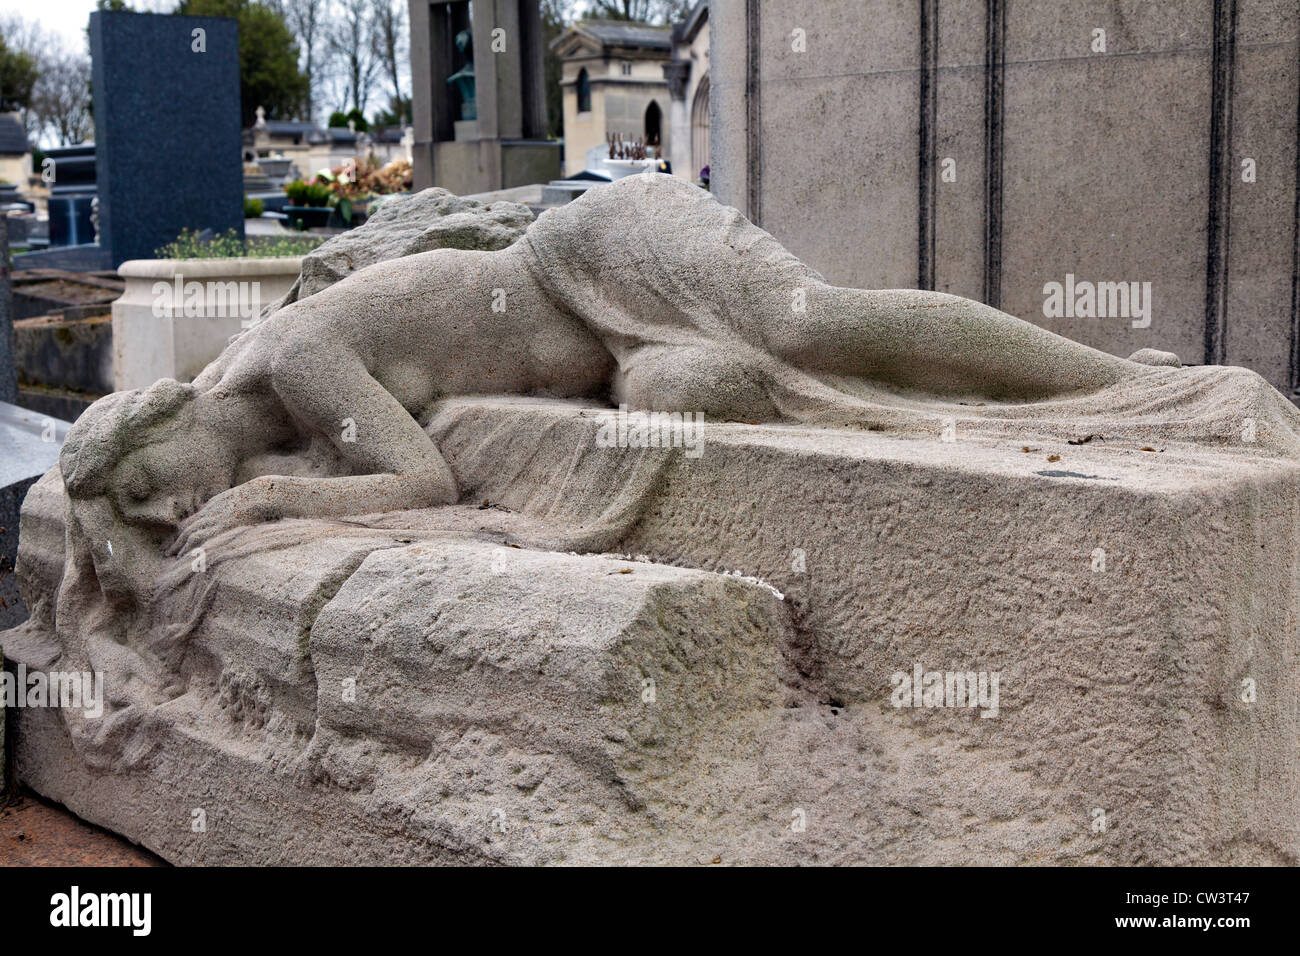 Stone sculpture of a woman lying on a grave, Pere Lachaise cemetery, Paris, France Stock Photo